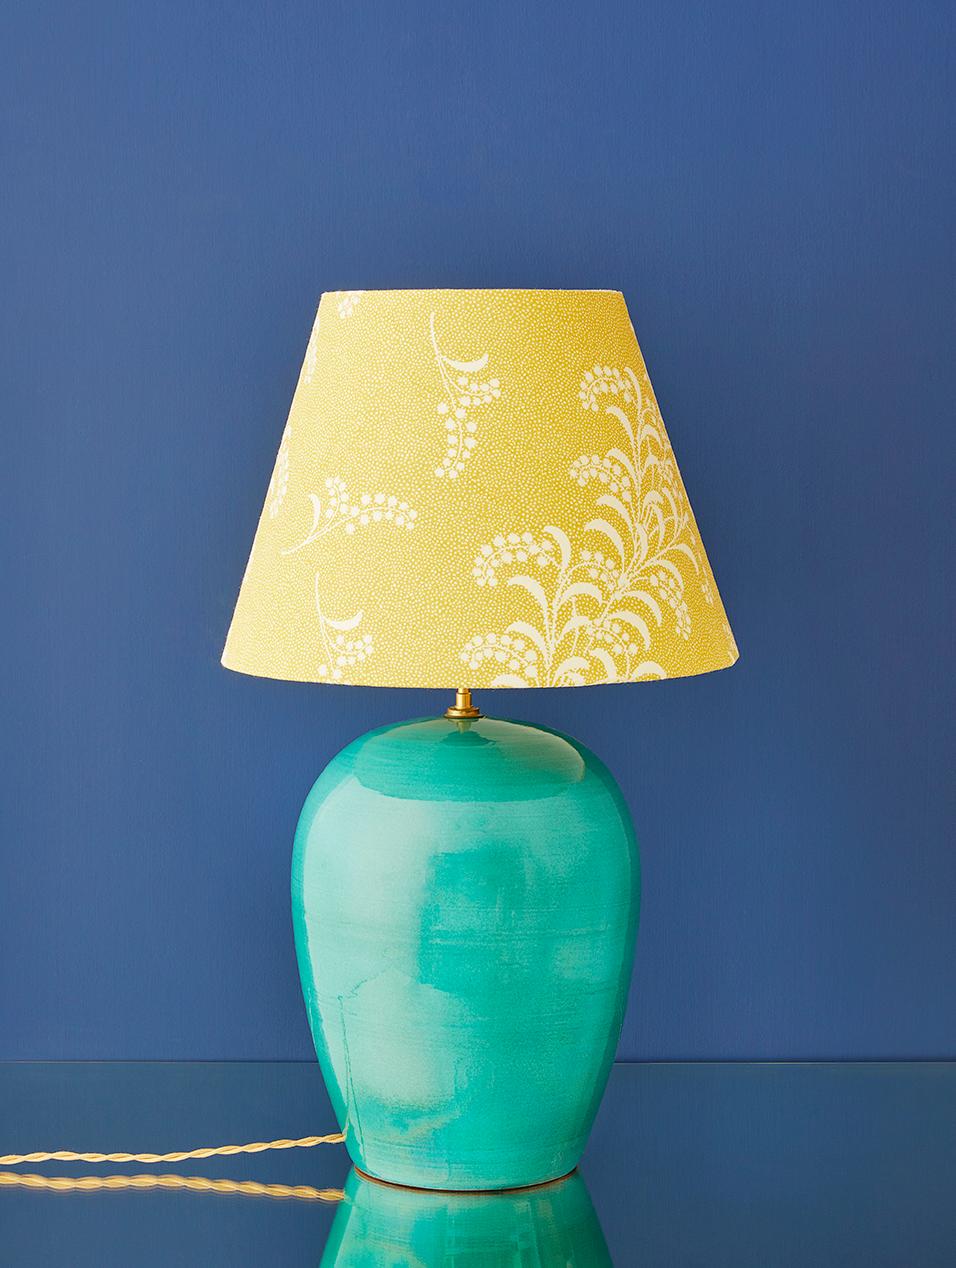 France, 1970's

Ceramic table lamp in green glaze with customized shade.

Measures: H 65 x Ø 38 cm.